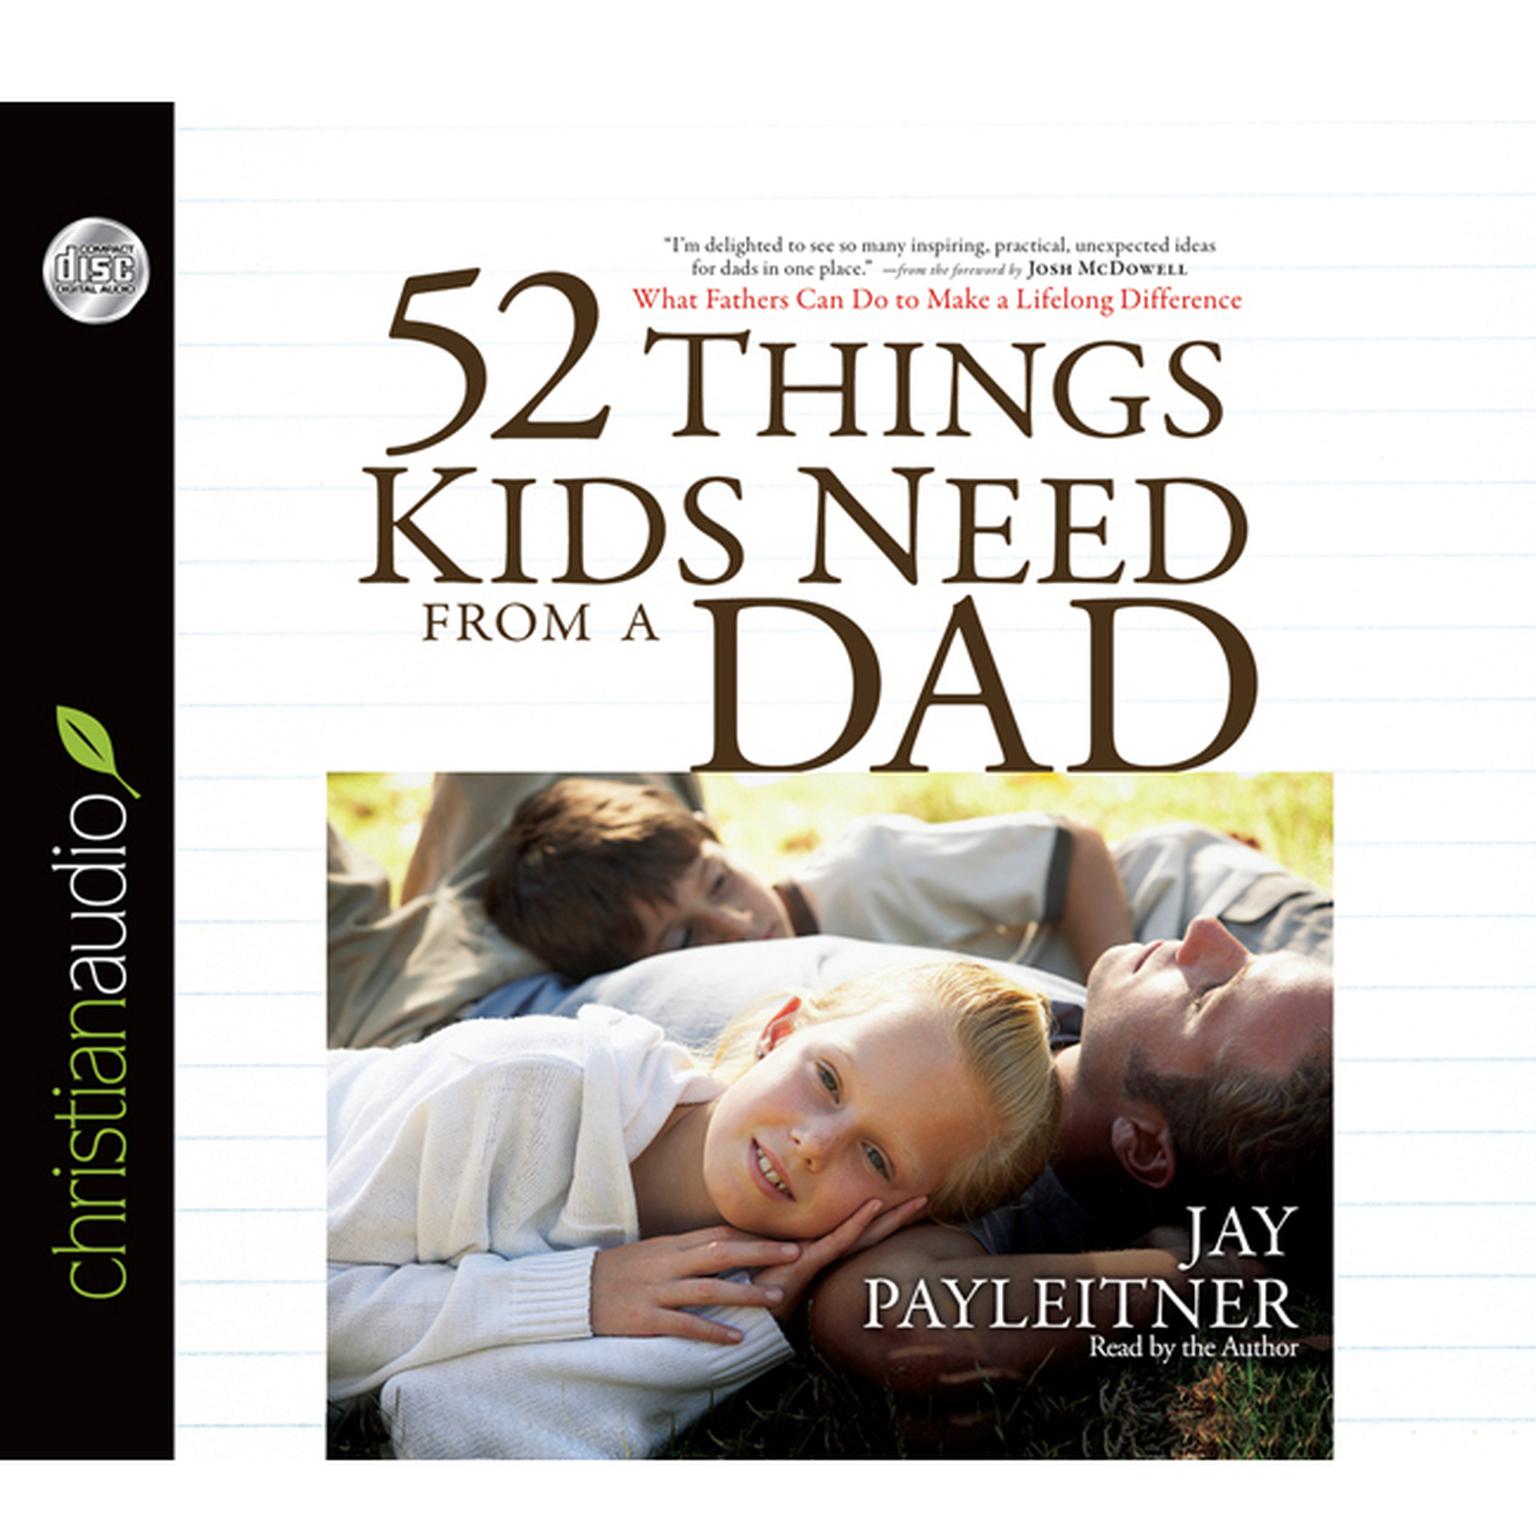 52 Things Kids Need From a Dad: What Fathers Can Do to Make a Lifelong Difference Audiobook, by Jay Payleitner